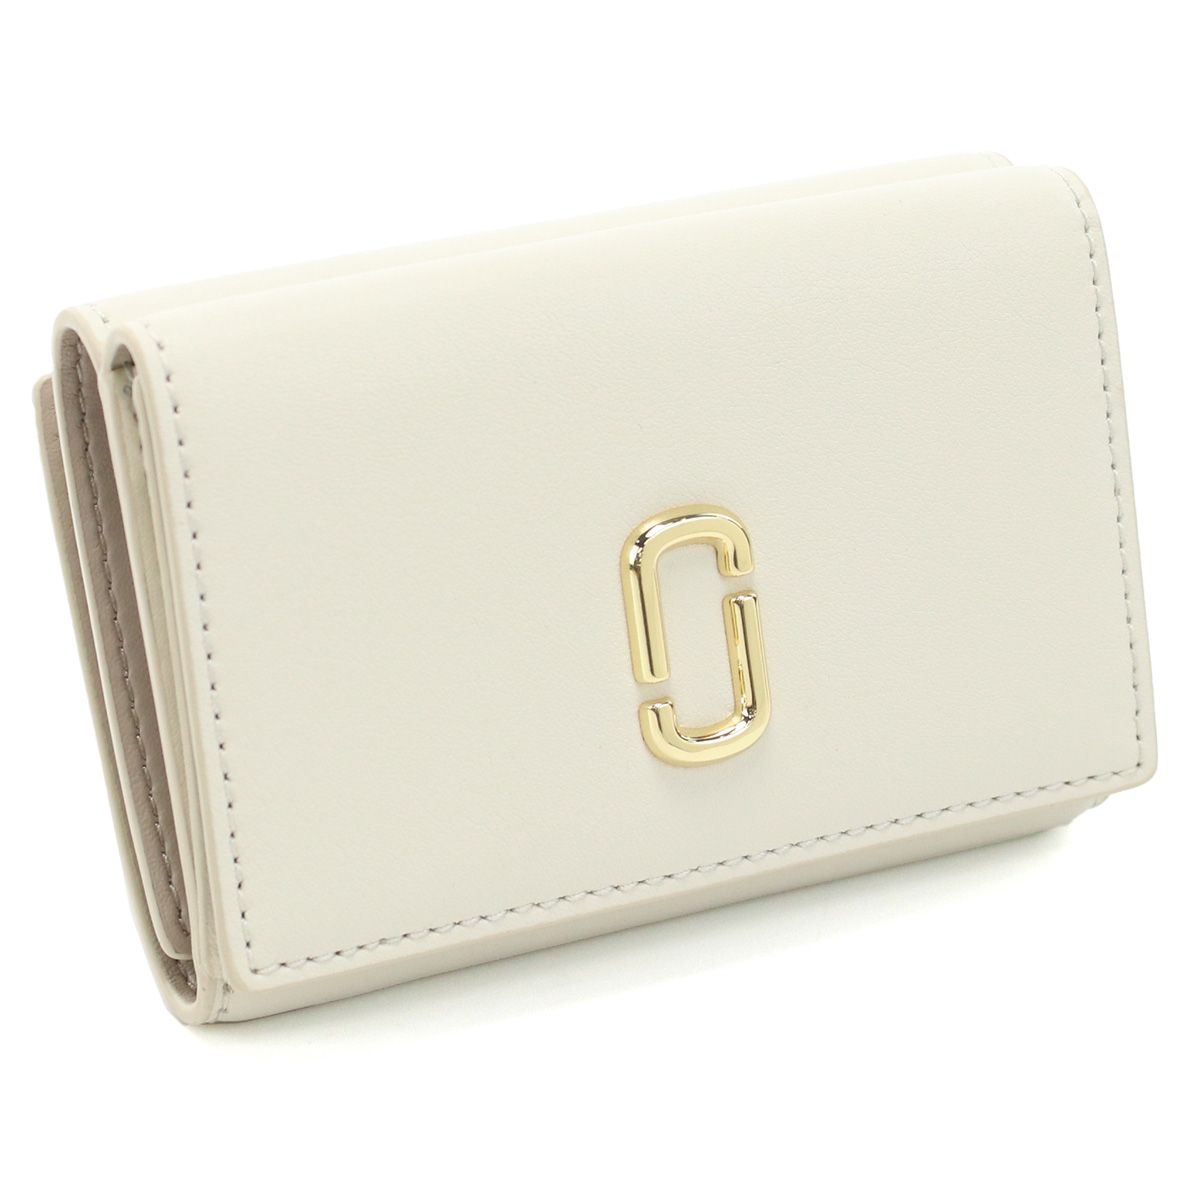 MARC JACOBS マーク・ジェイコブス THE TRIFOLD WALLET 2S3SMP005S01 三折財布小銭入付き CLOUD WHITE ホワイト系 レディース